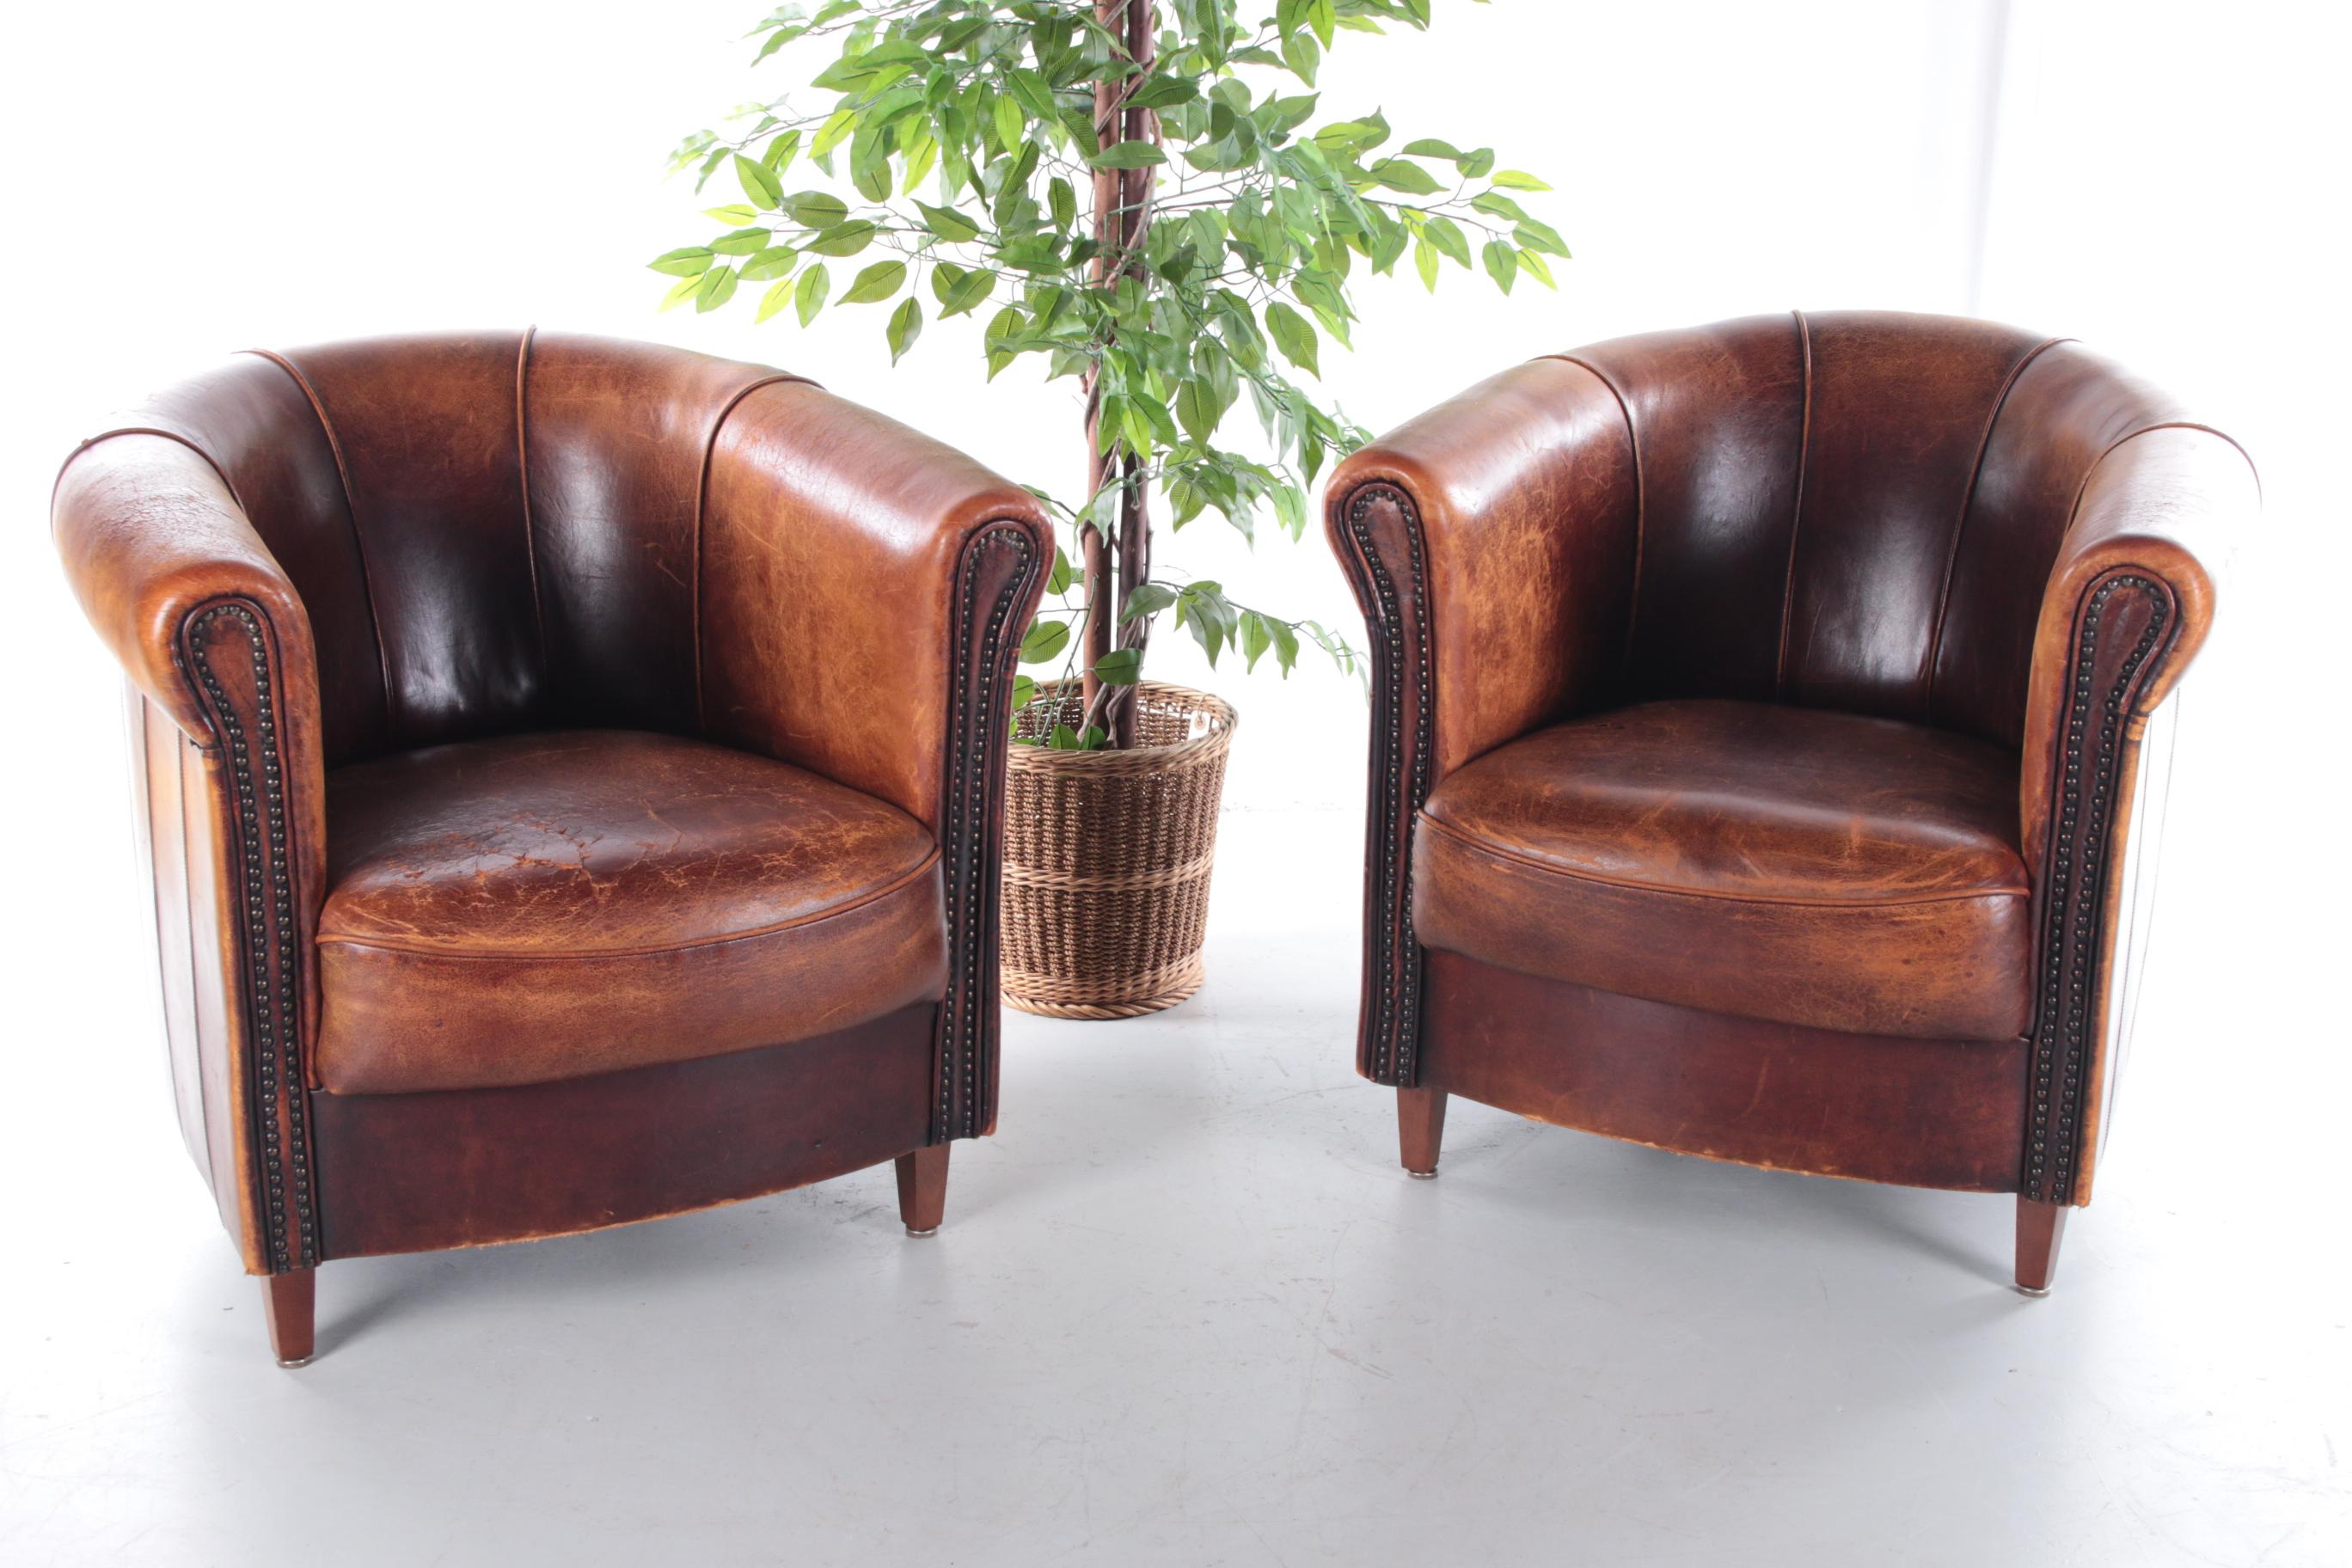 Set of two Joris sheepskin leather armchairs with a beautiful brown patina


The vintage armchairs are old school, but also timeless and easy to combine with many different styles!

This set is marked with Joris, here it is designed and